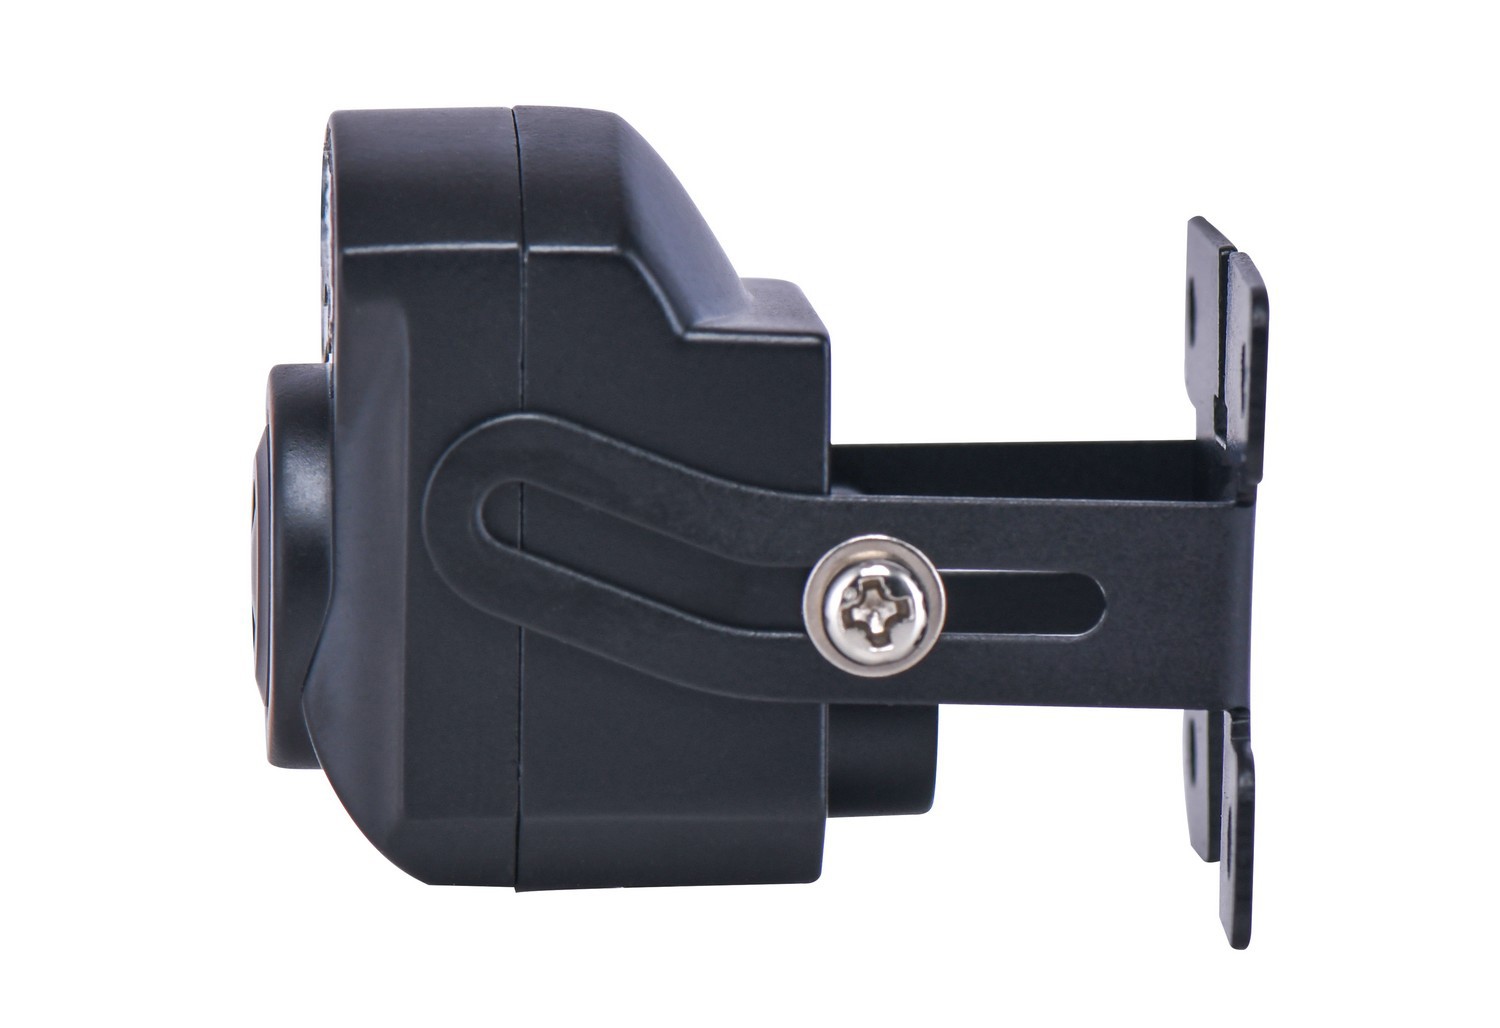 micro car camera with IR LED and WDR technology